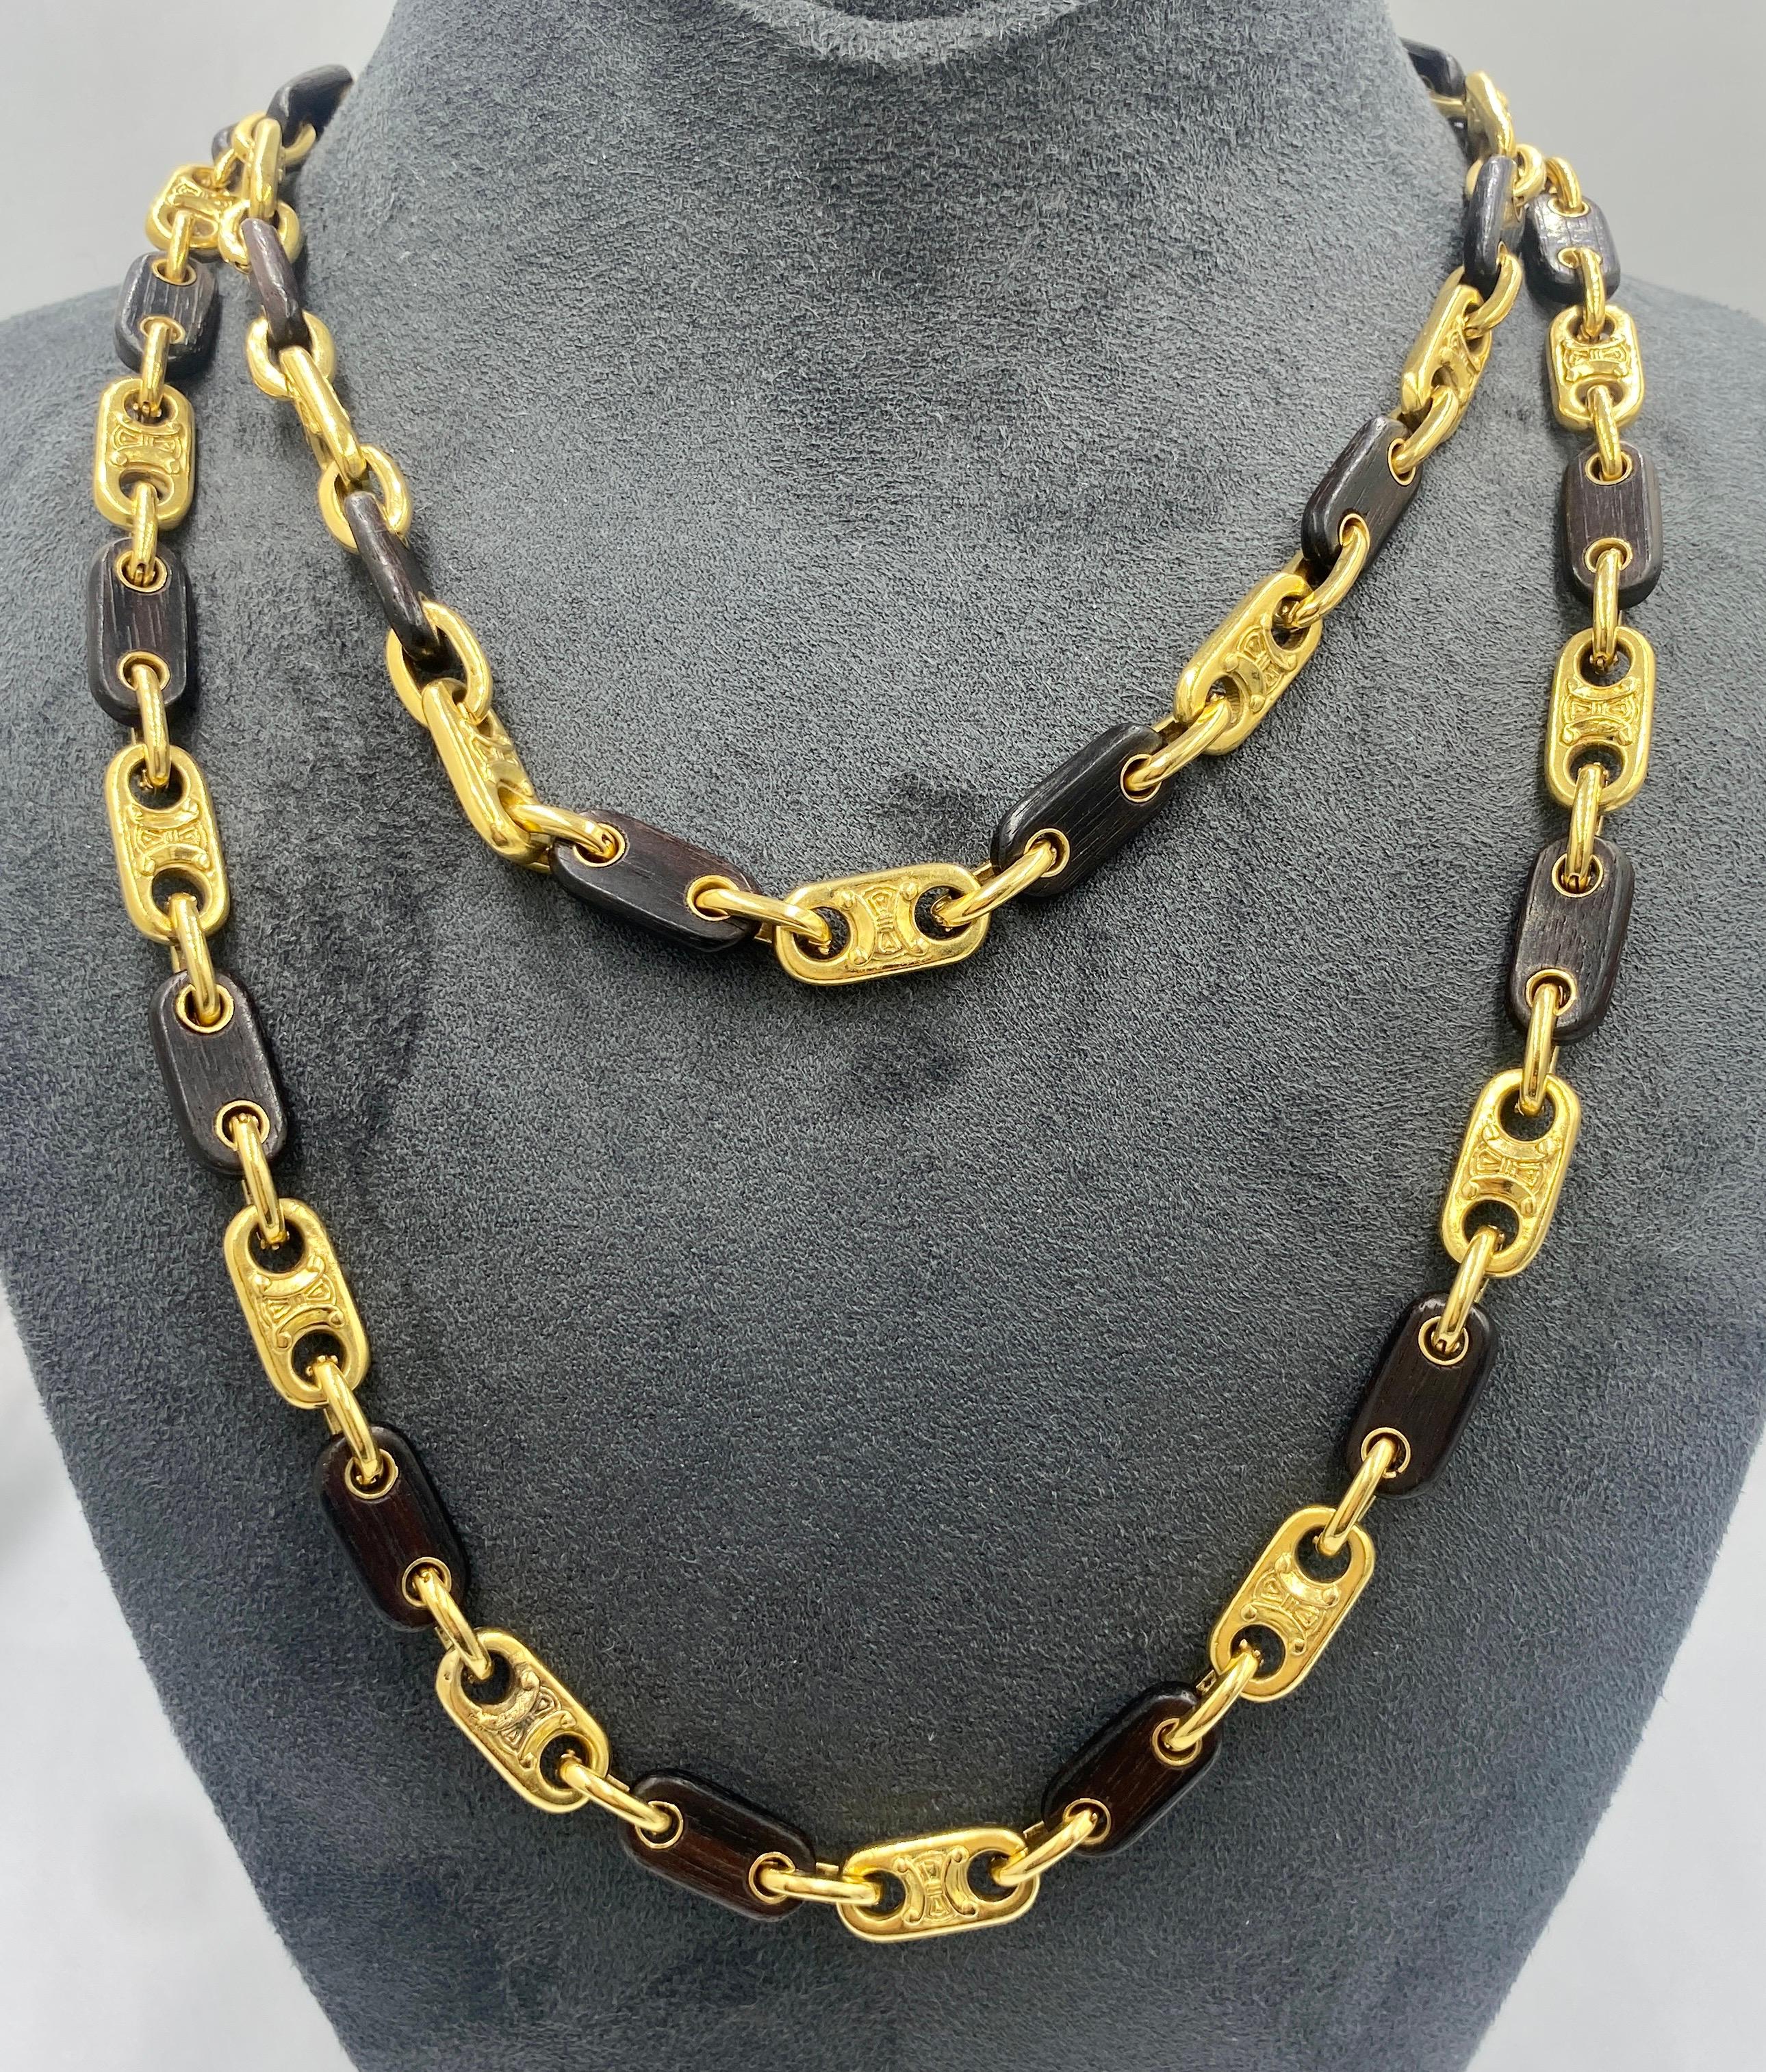 This necklace made in 1970s by Celine is a highly wearable piece with interlocking 18k gold and ebony links. The set also has a bracelet which is listed separately on 1stDibs. A photo of the bracelet is included below.